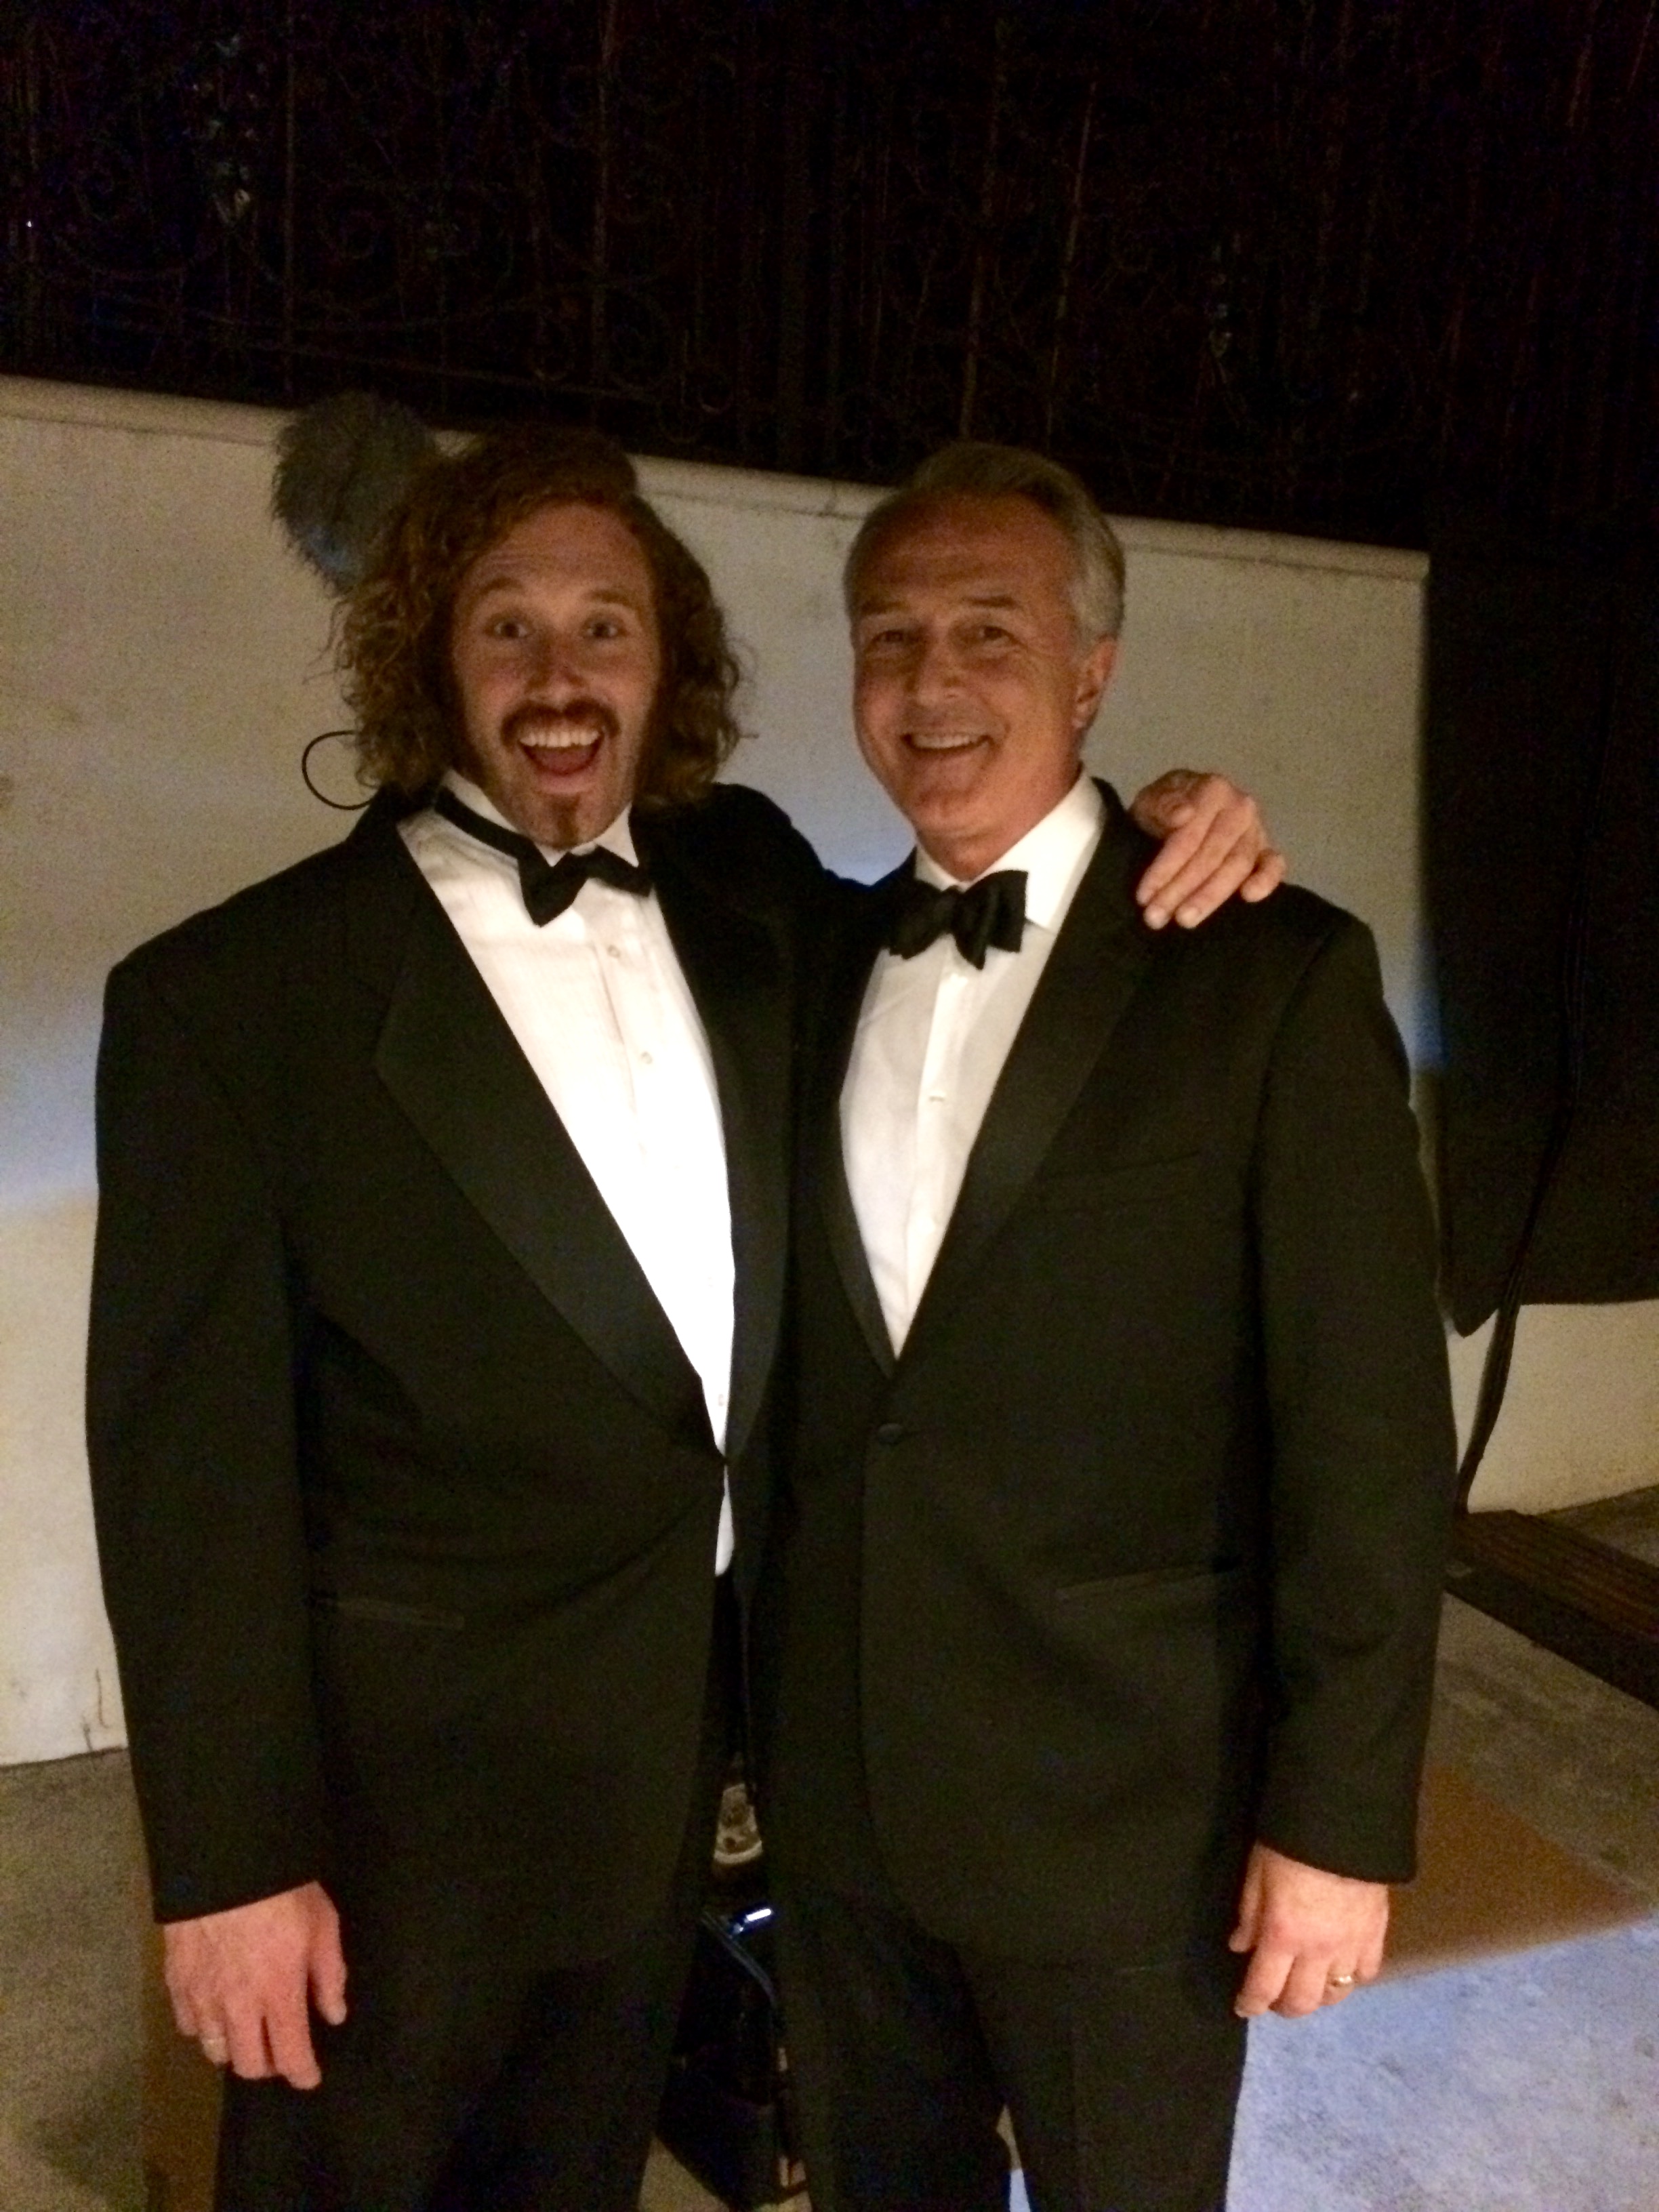 TJ Miller & Dar Dixon on the set of HBO's Silicon Valley.